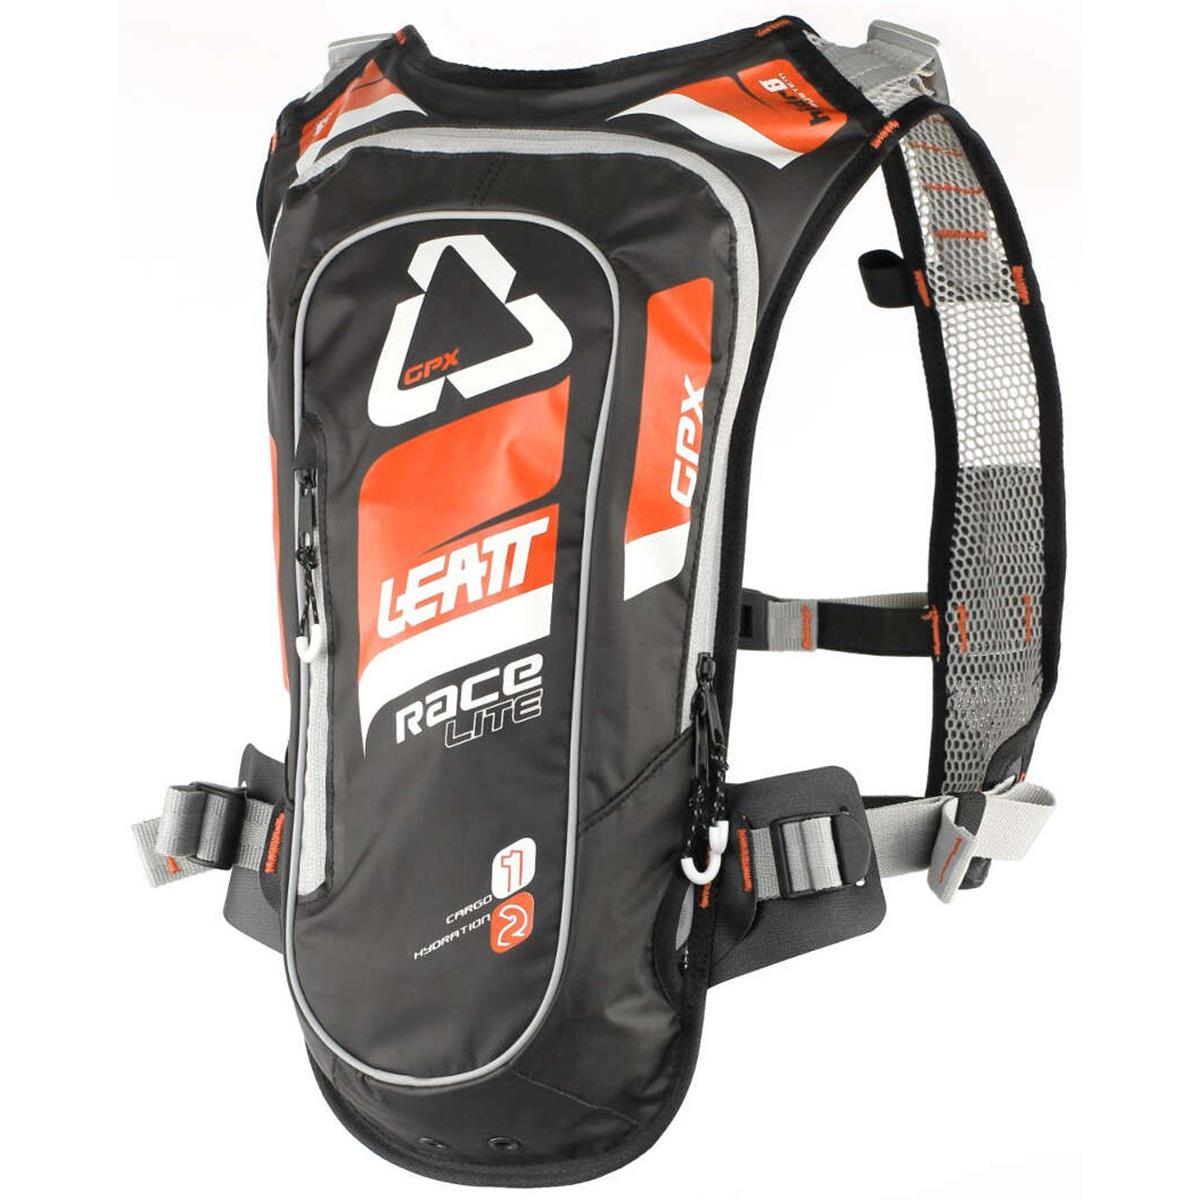 Leatt Backpack with Hydration System GPX Race HF 2.0 Orange/Black, 2 L